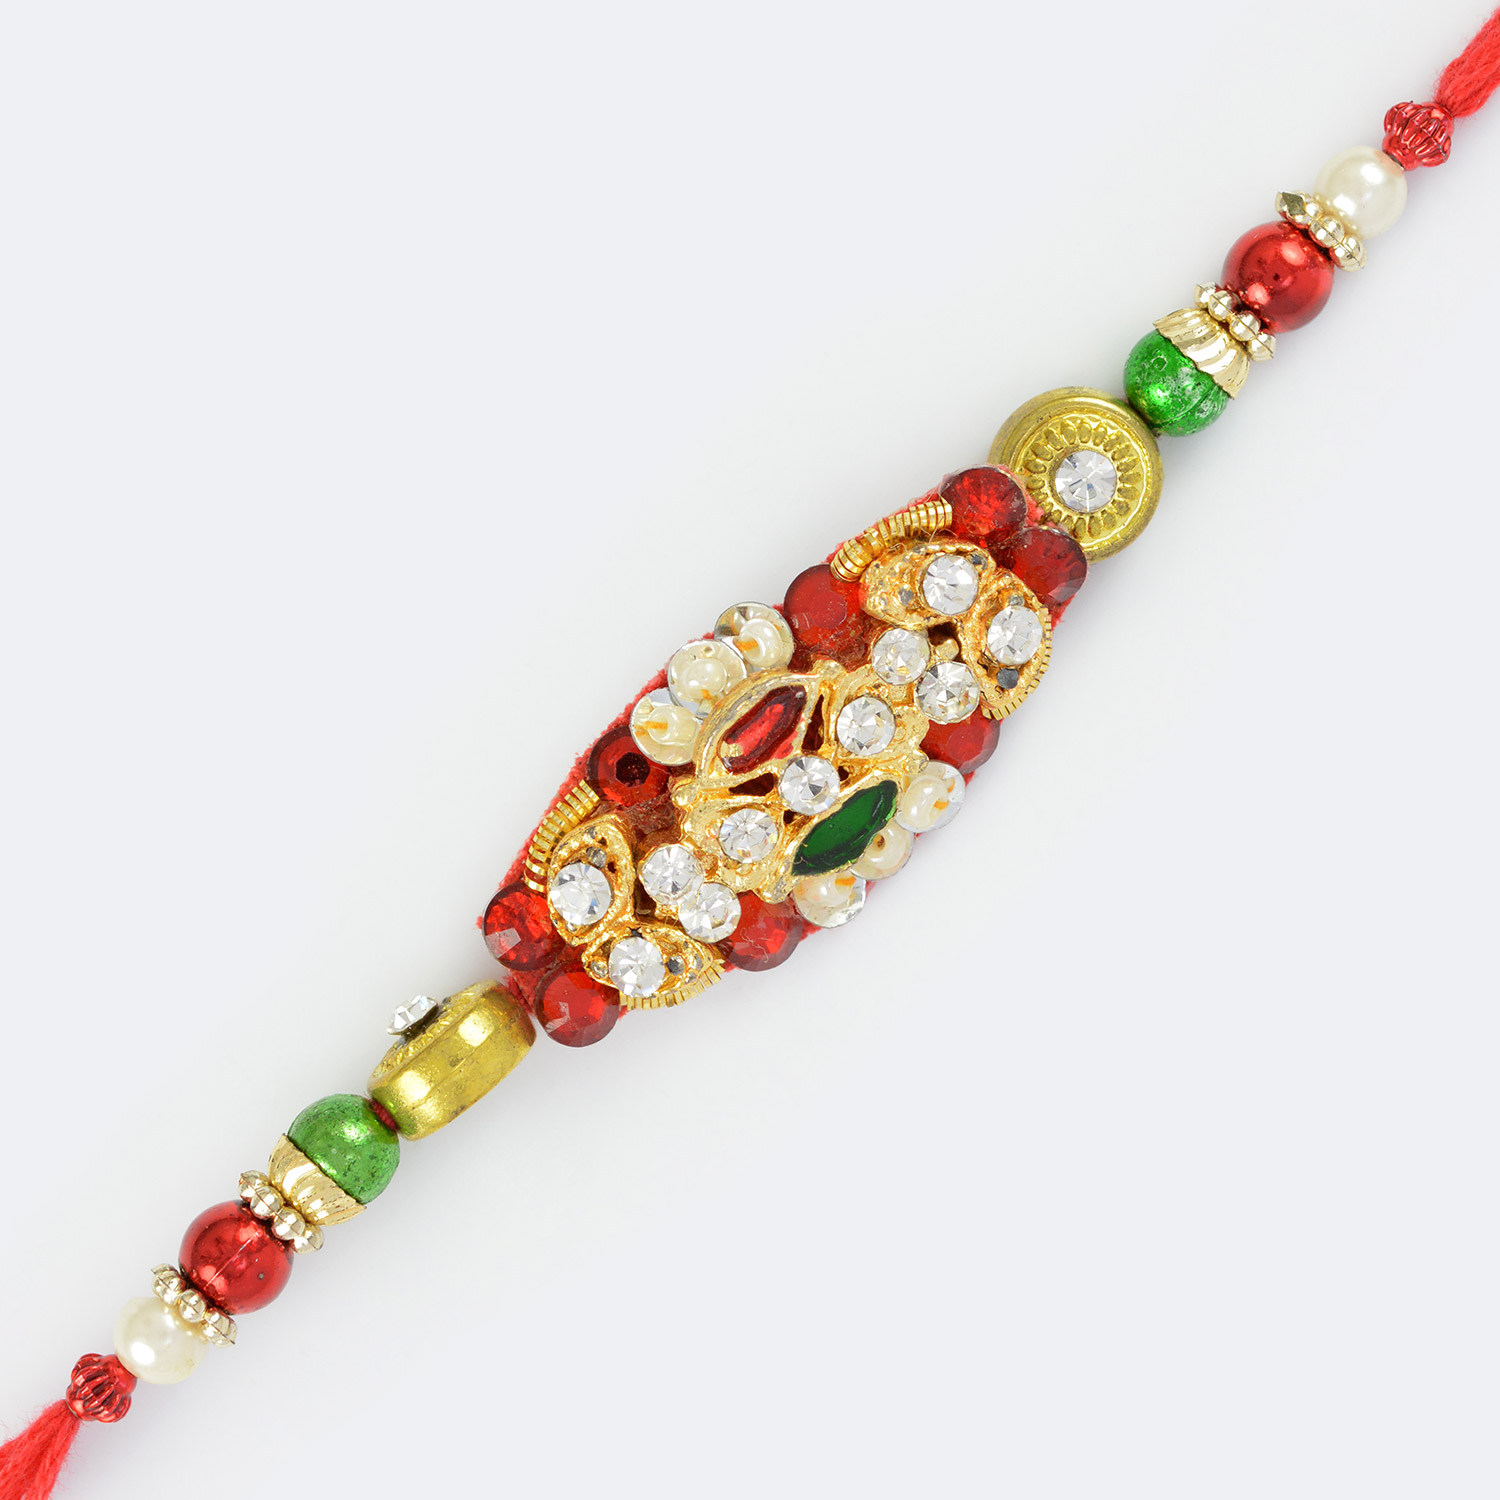 Exclusive Golden Diamond Pearls and Colorful Beads Fancy Rakhi